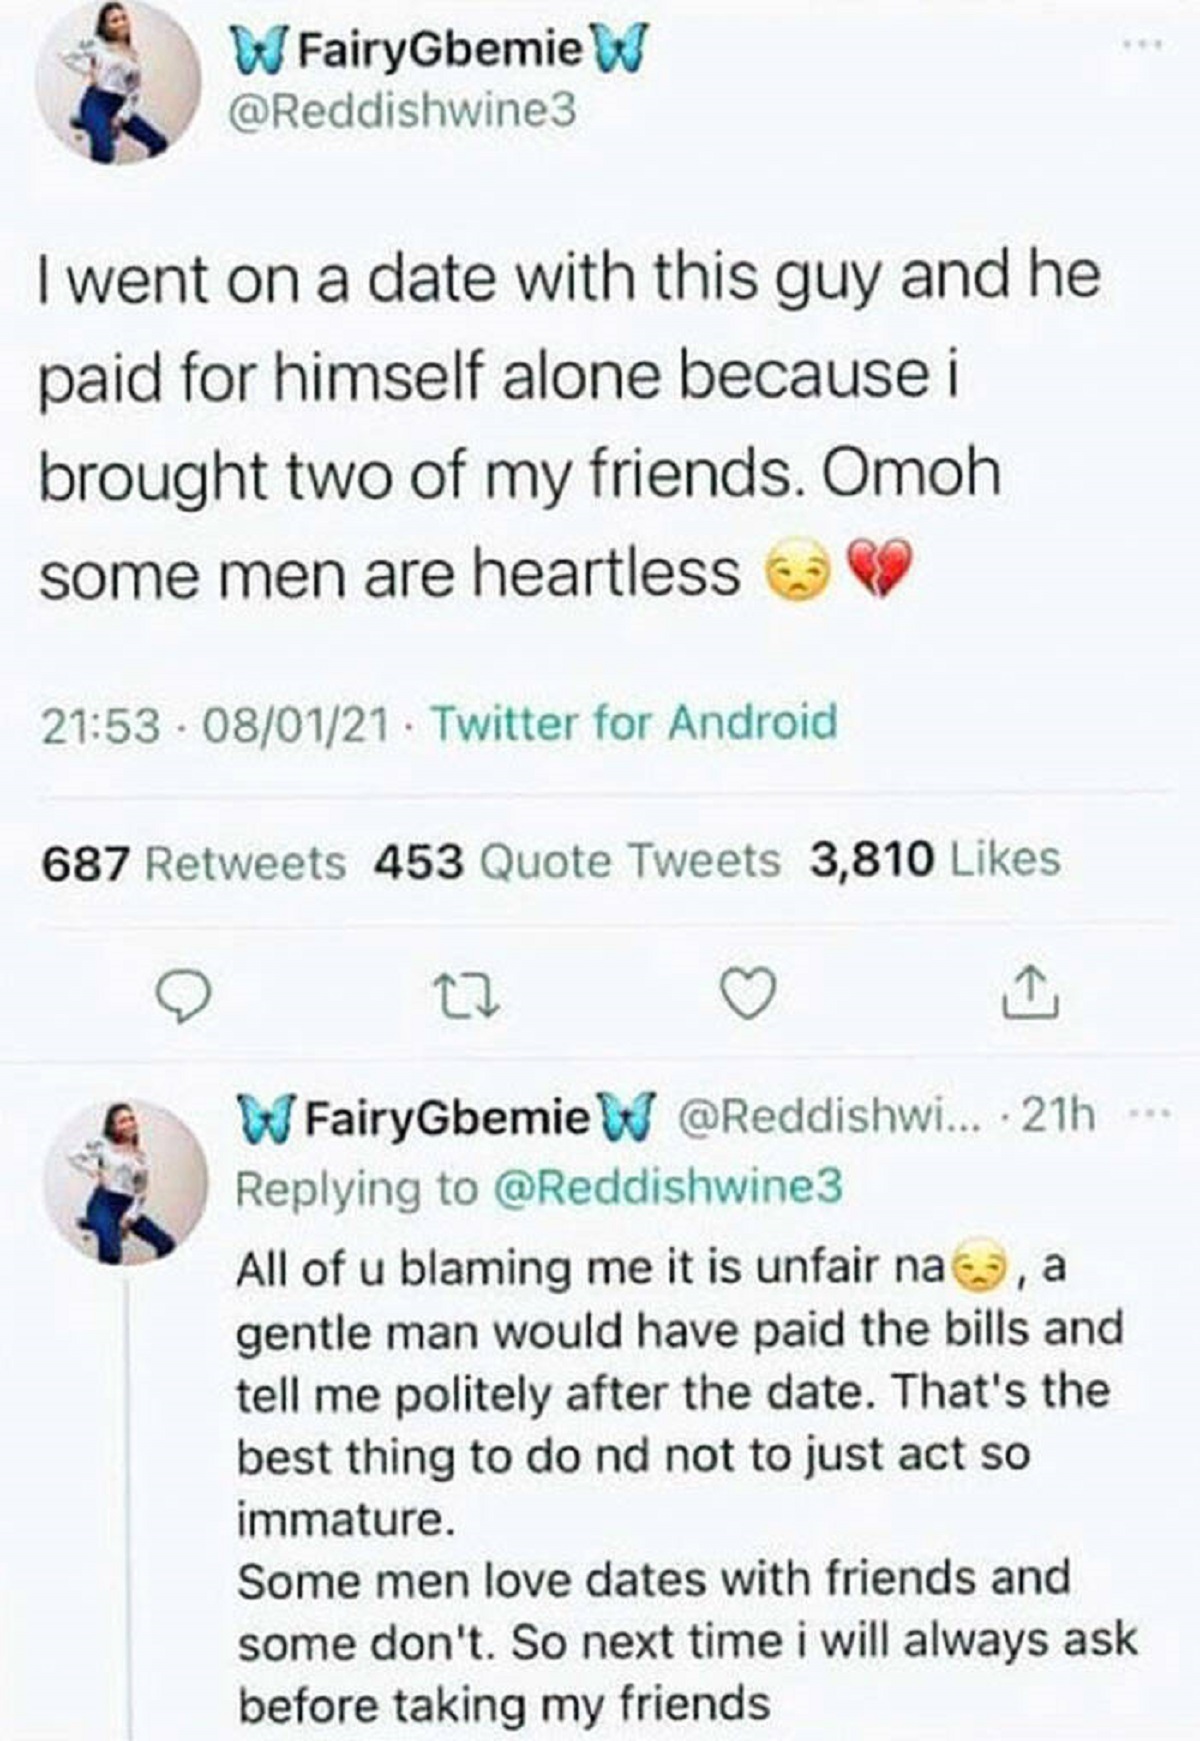 screenshot - WFairyGbemie W I went on a date with this guy and he paid for himself alone because i brought two of my friends. Omoh some men are heartless 080121 Twitter for Android 687 453 Quote Tweets 3,810 27 WFairyGbemie W ... 21h All of u blaming me i